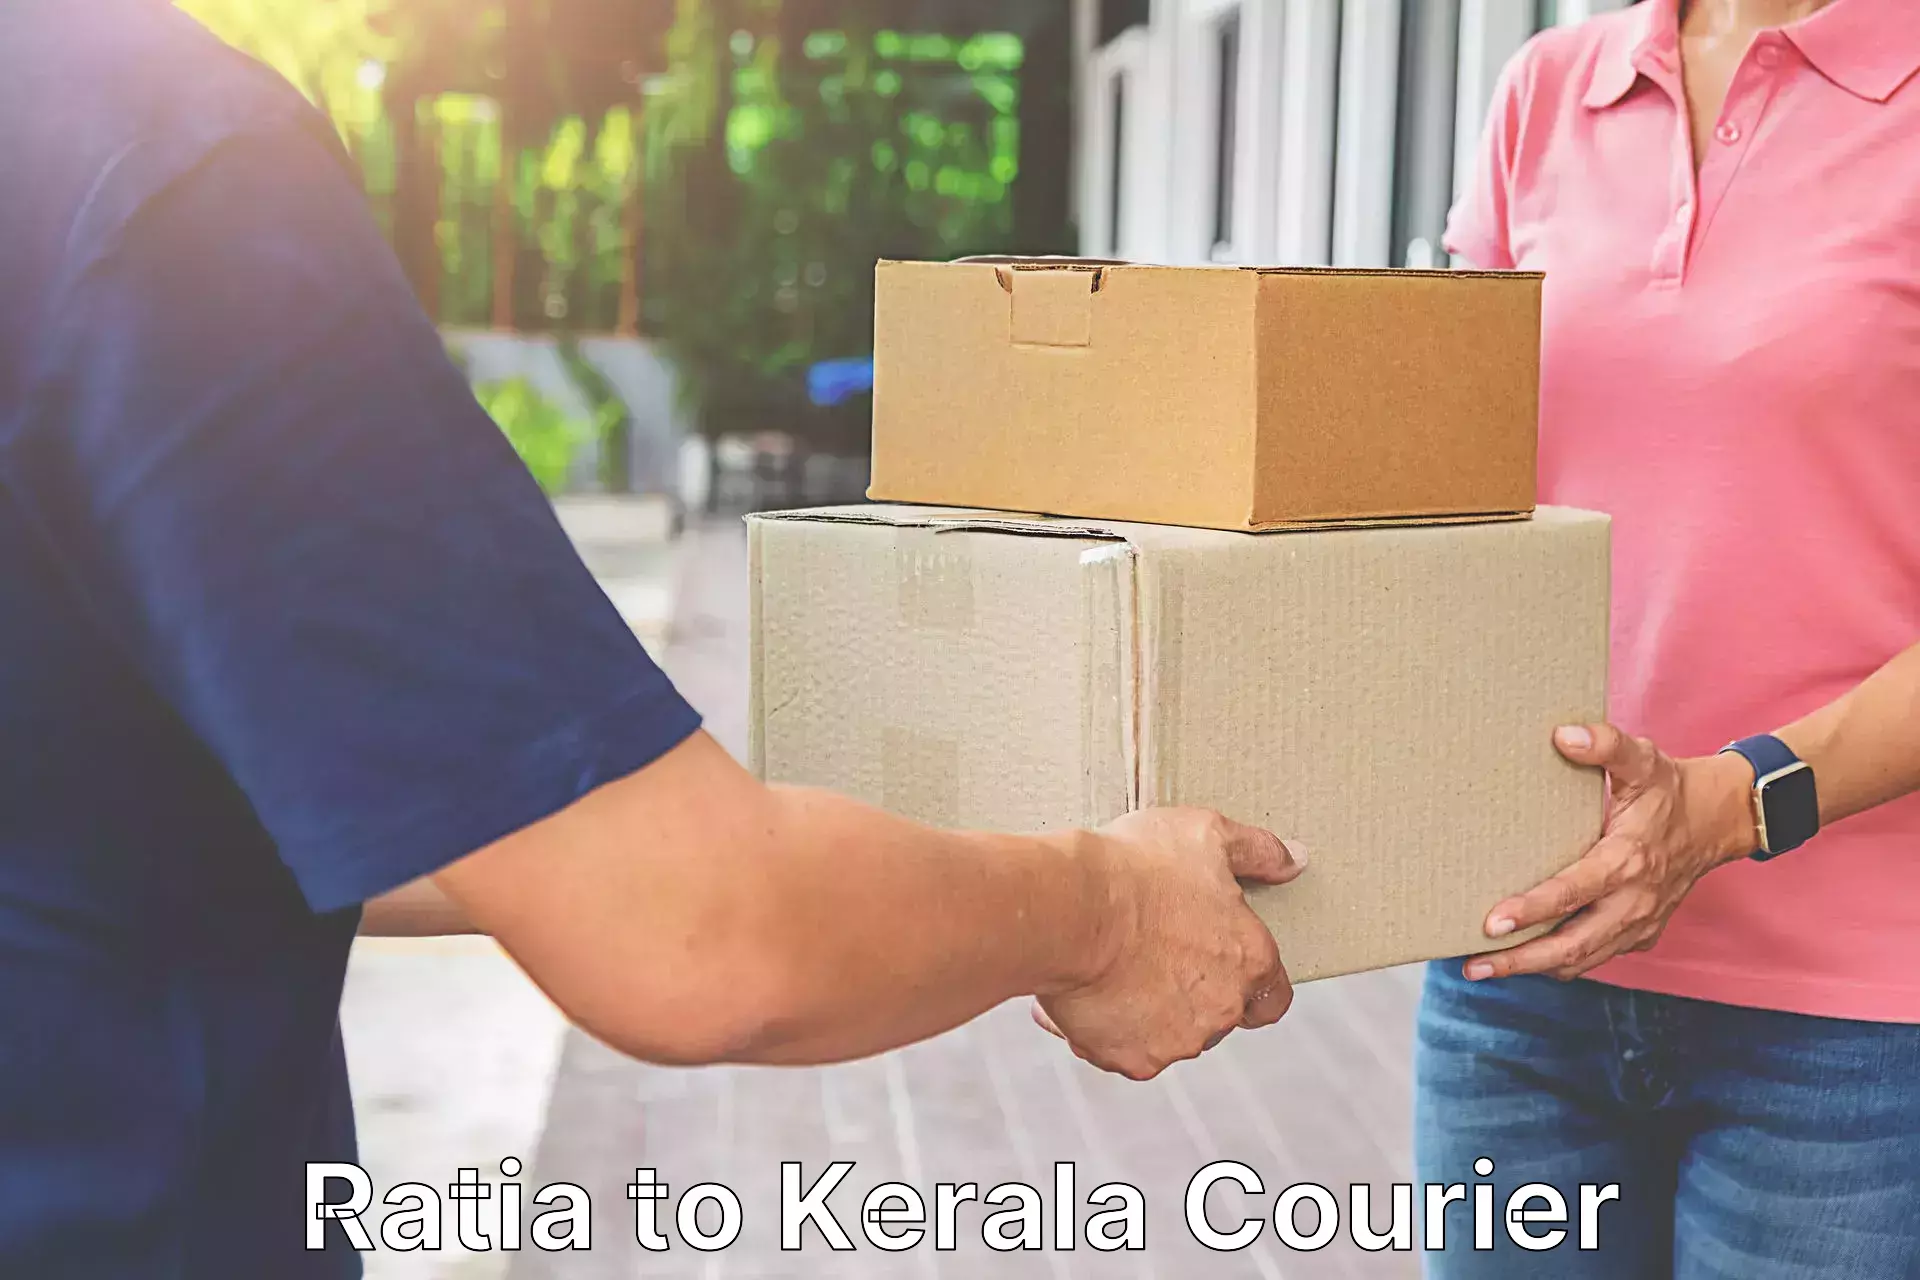 Round-the-clock parcel delivery Ratia to Kerala